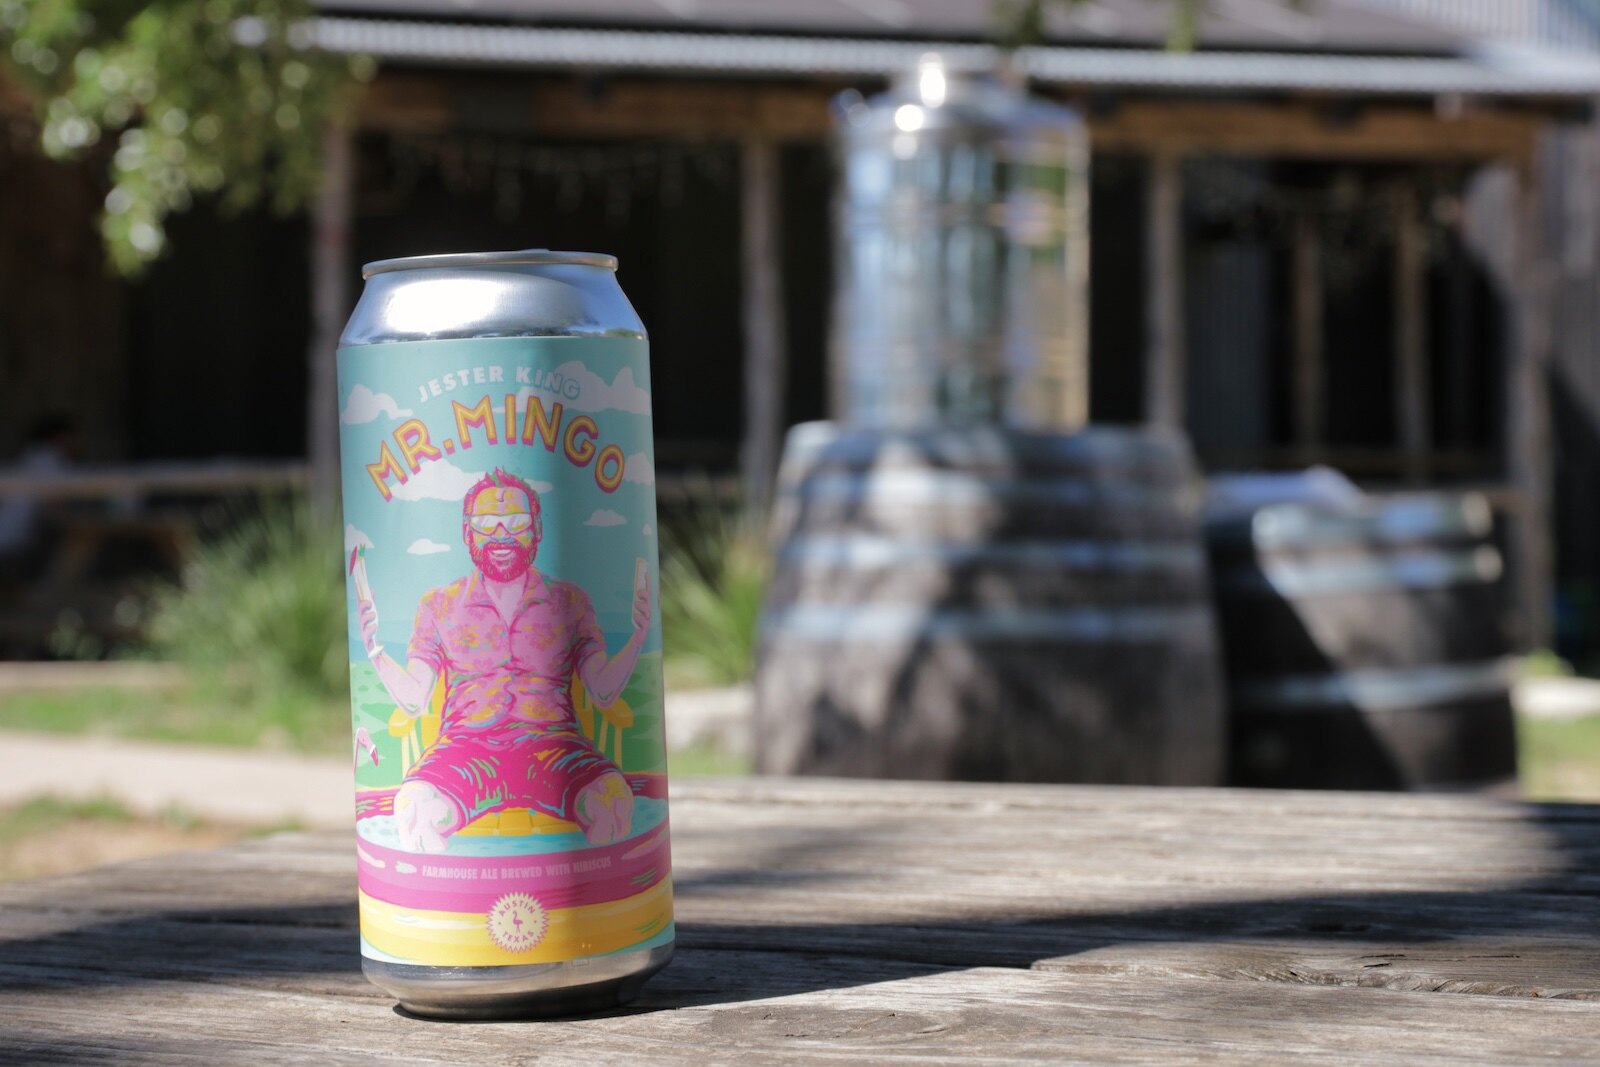 Mr. Mingo, Farmhouse Ale brewed at Jester King brewery 